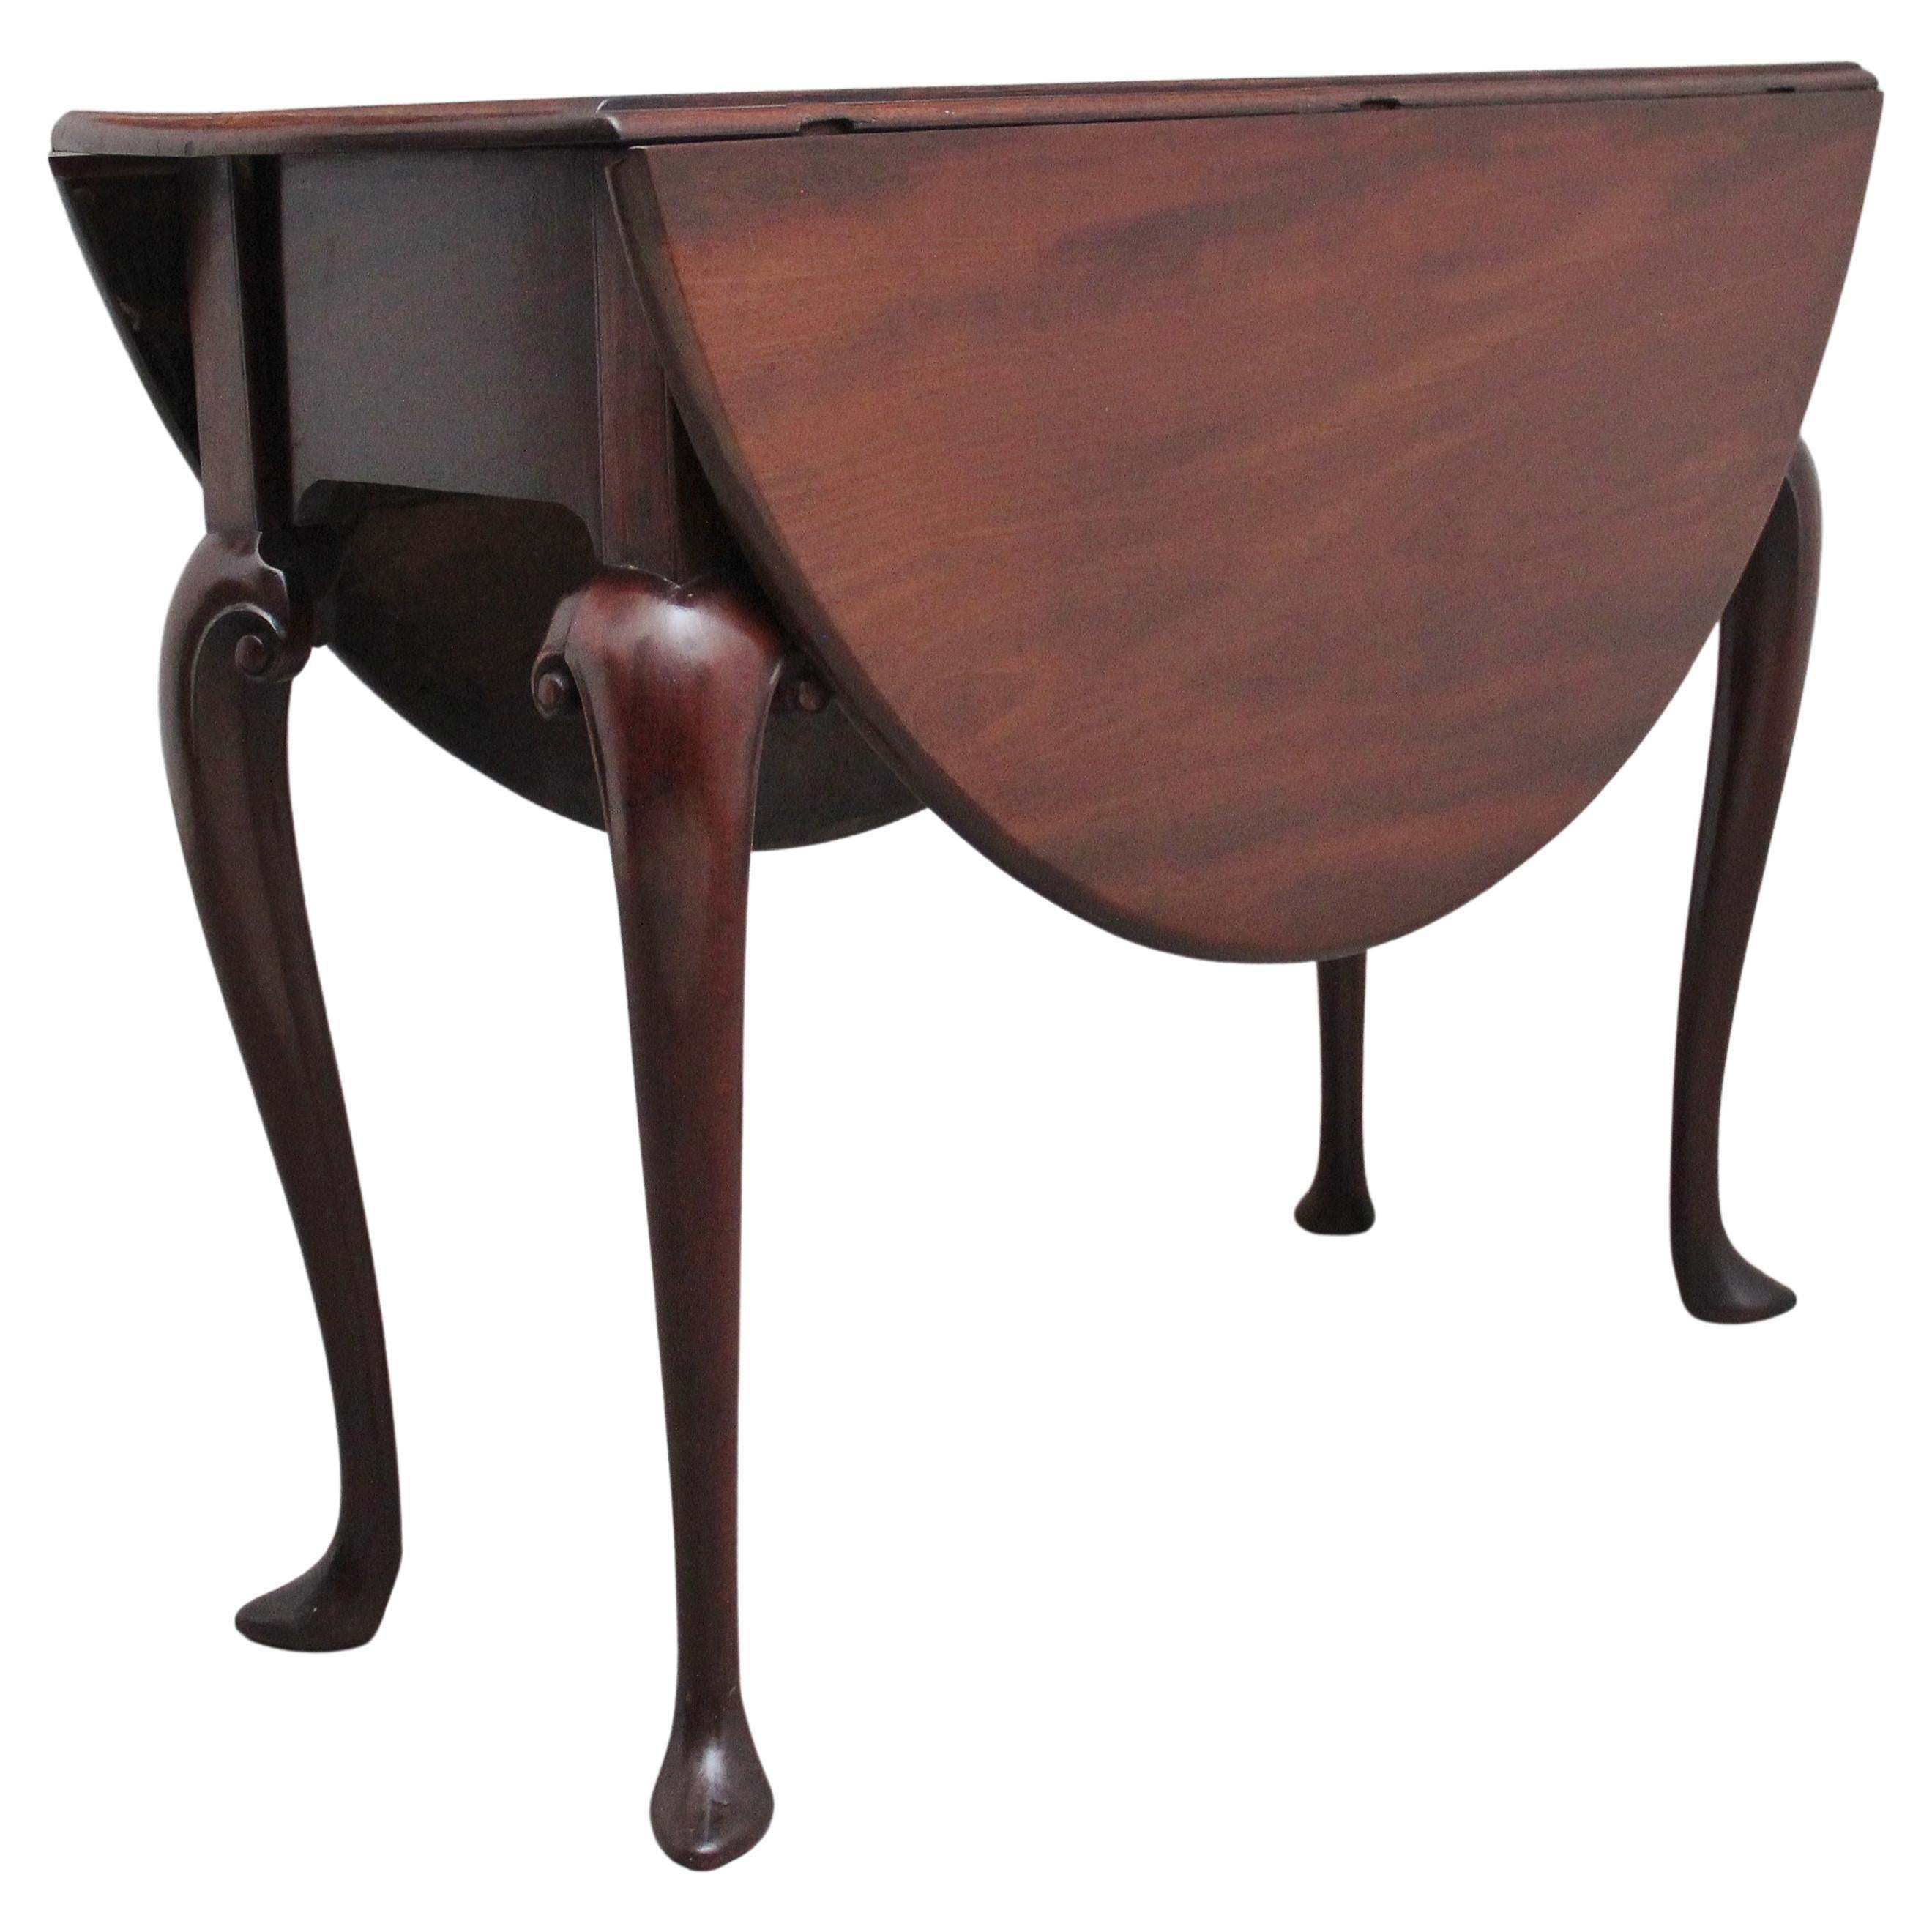 18th Century Mahogany Drop Leaf Table from the Georgian Period